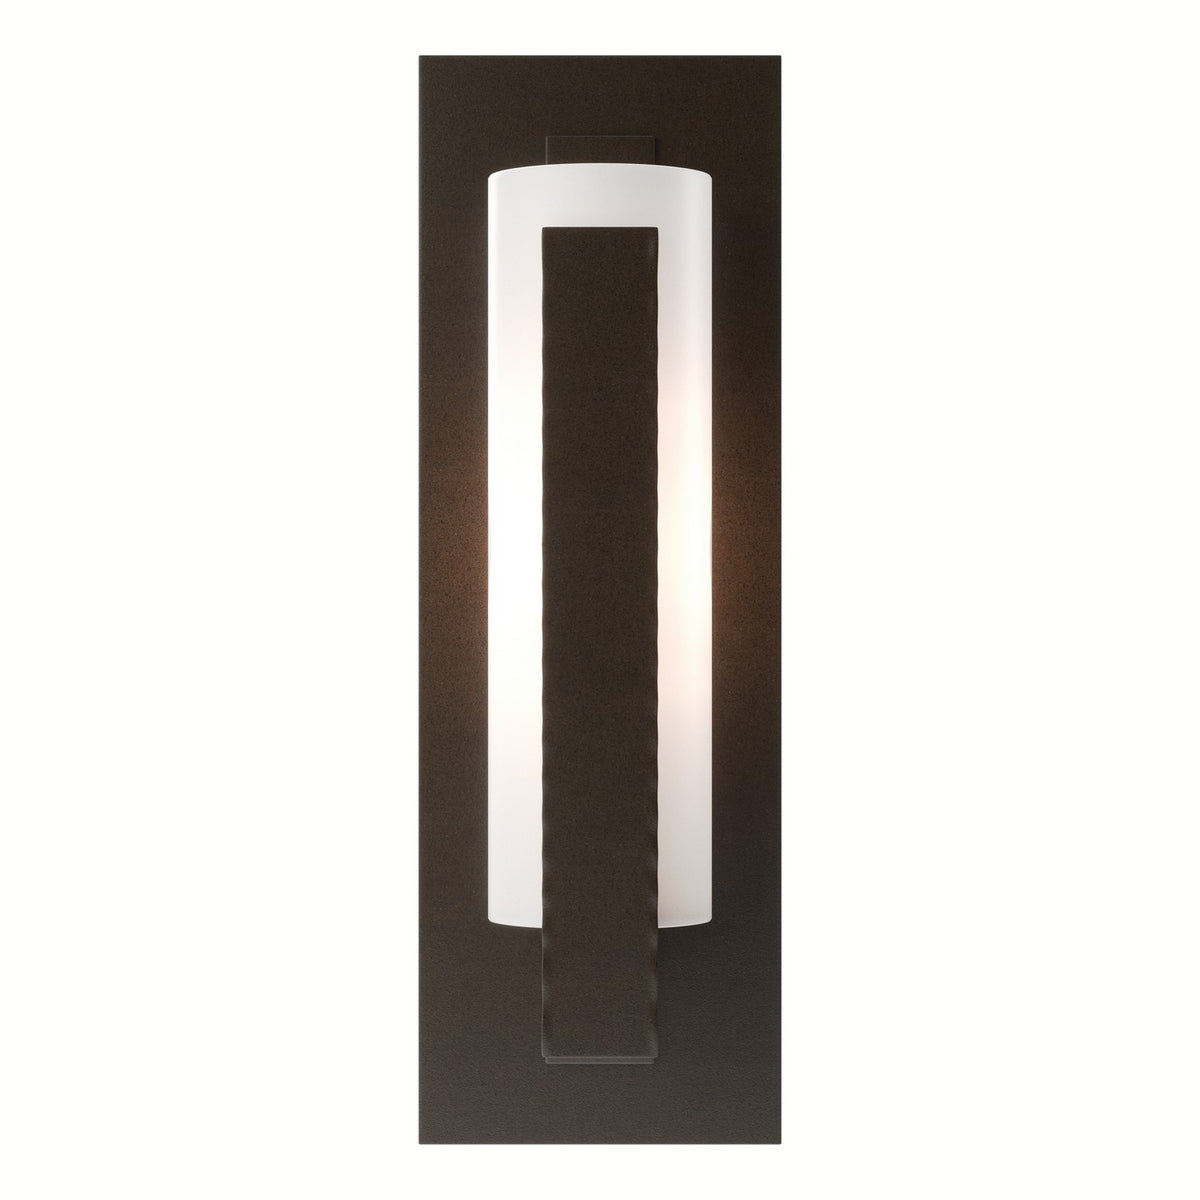 Hubbardton Forge - 217185-SKT-14-GG0065 - One Light Wall Sconce - Vertical Bar - Oil Rubbed Bronze